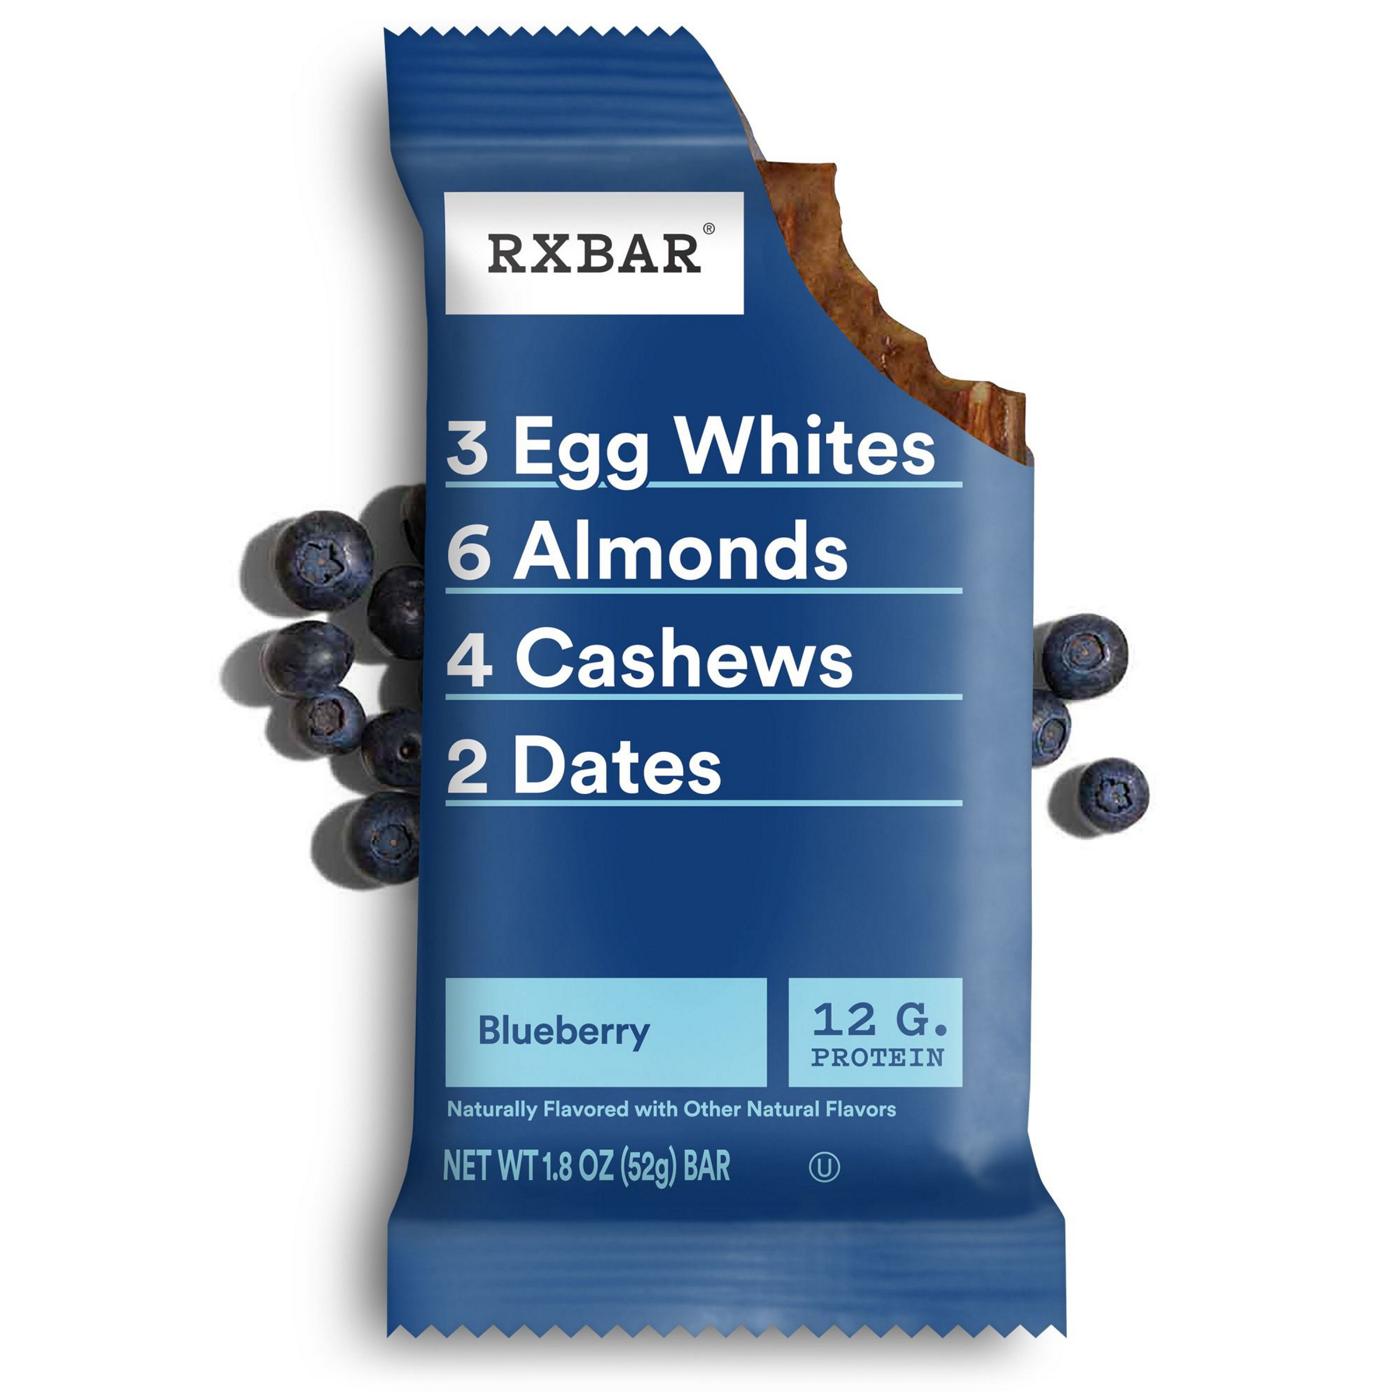 RXBAR Blueberry Protein Bars; image 2 of 3